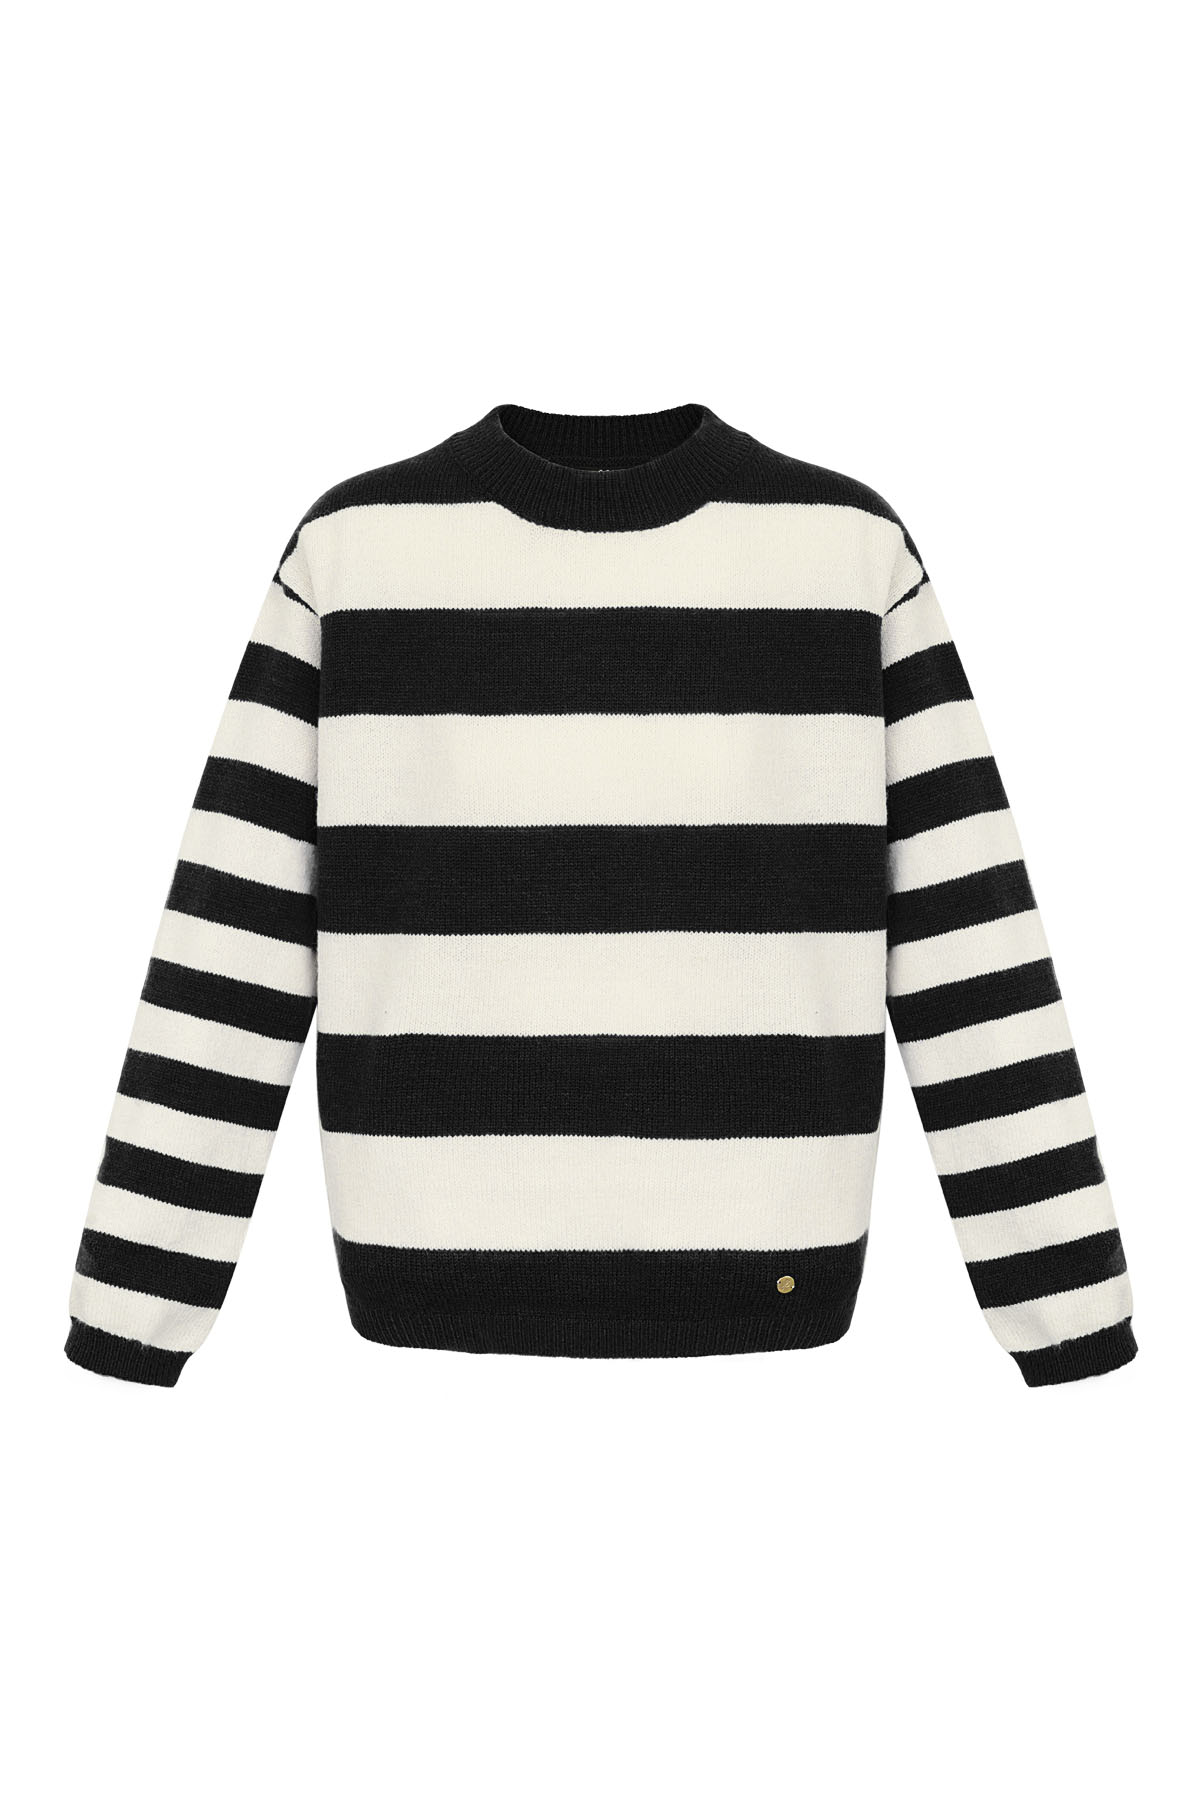 Knitted striped sweater - black and white